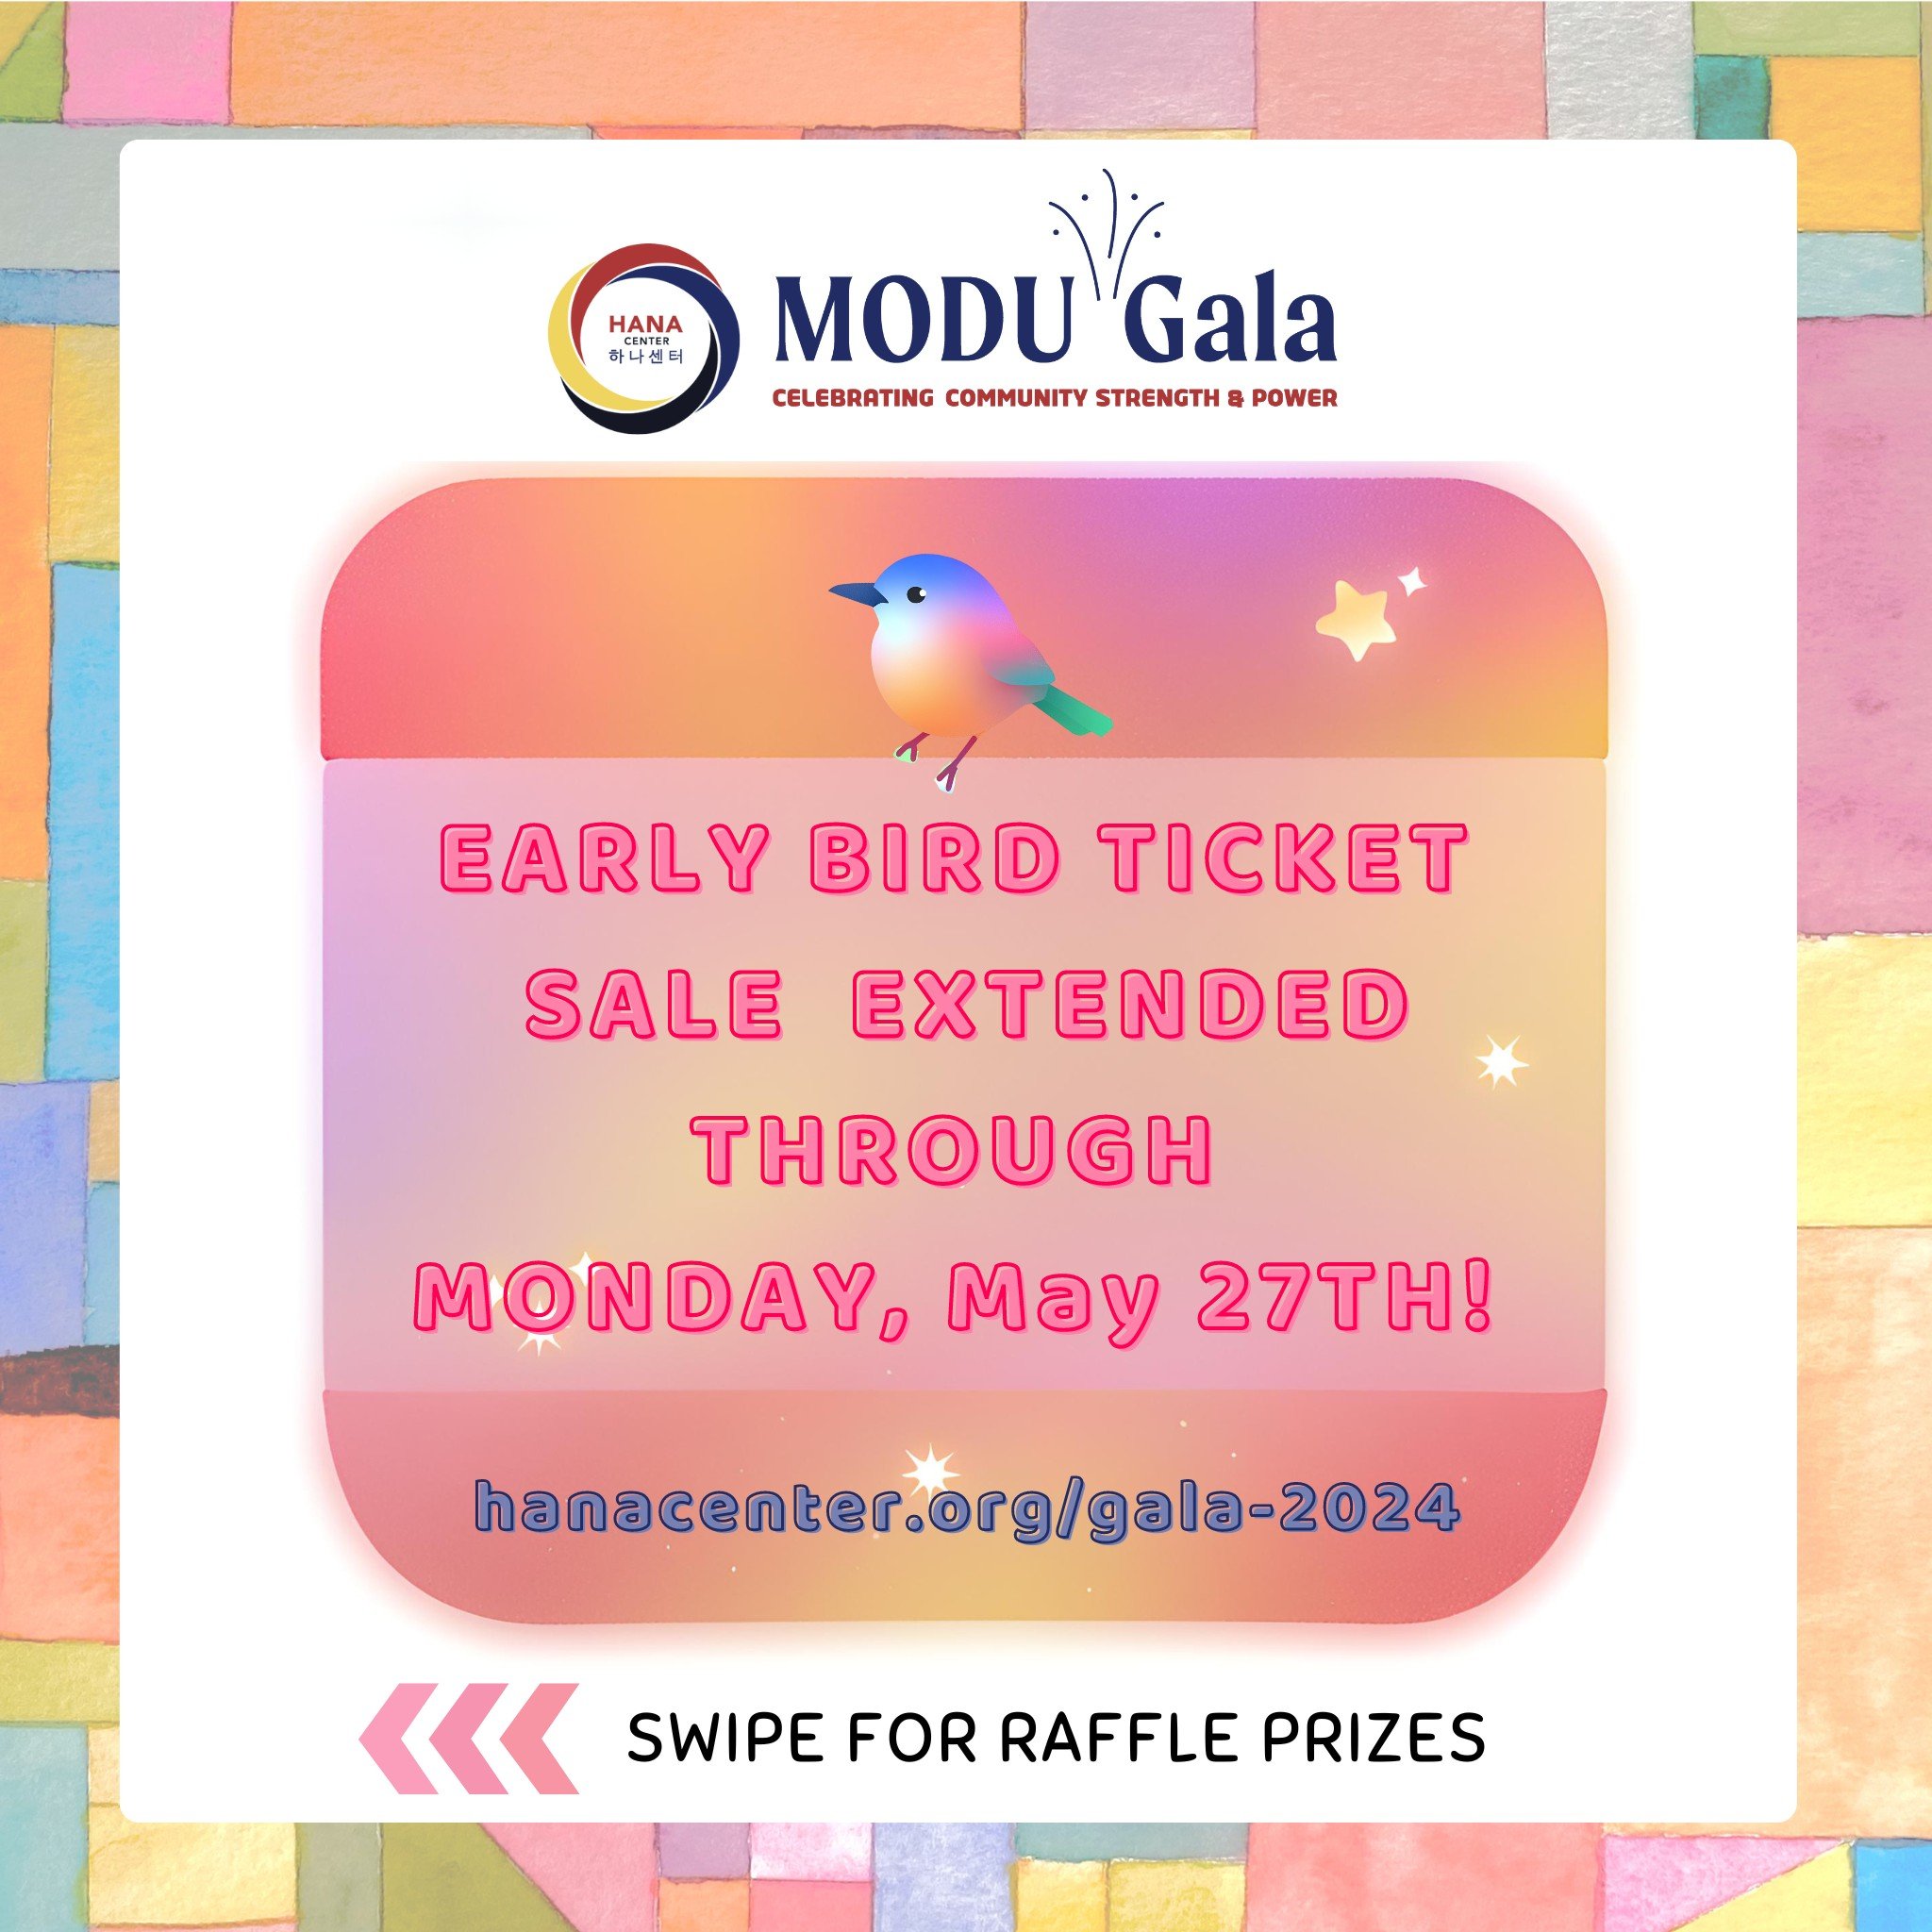 Due to popular demand, Early Bird ticket sales have been extended through Monday, May 27th! Swipe left to see some of our great raffle prizes!

🥳 Our annual MODU Gala brings our community together to celebrate the remarkable individuals and organiza